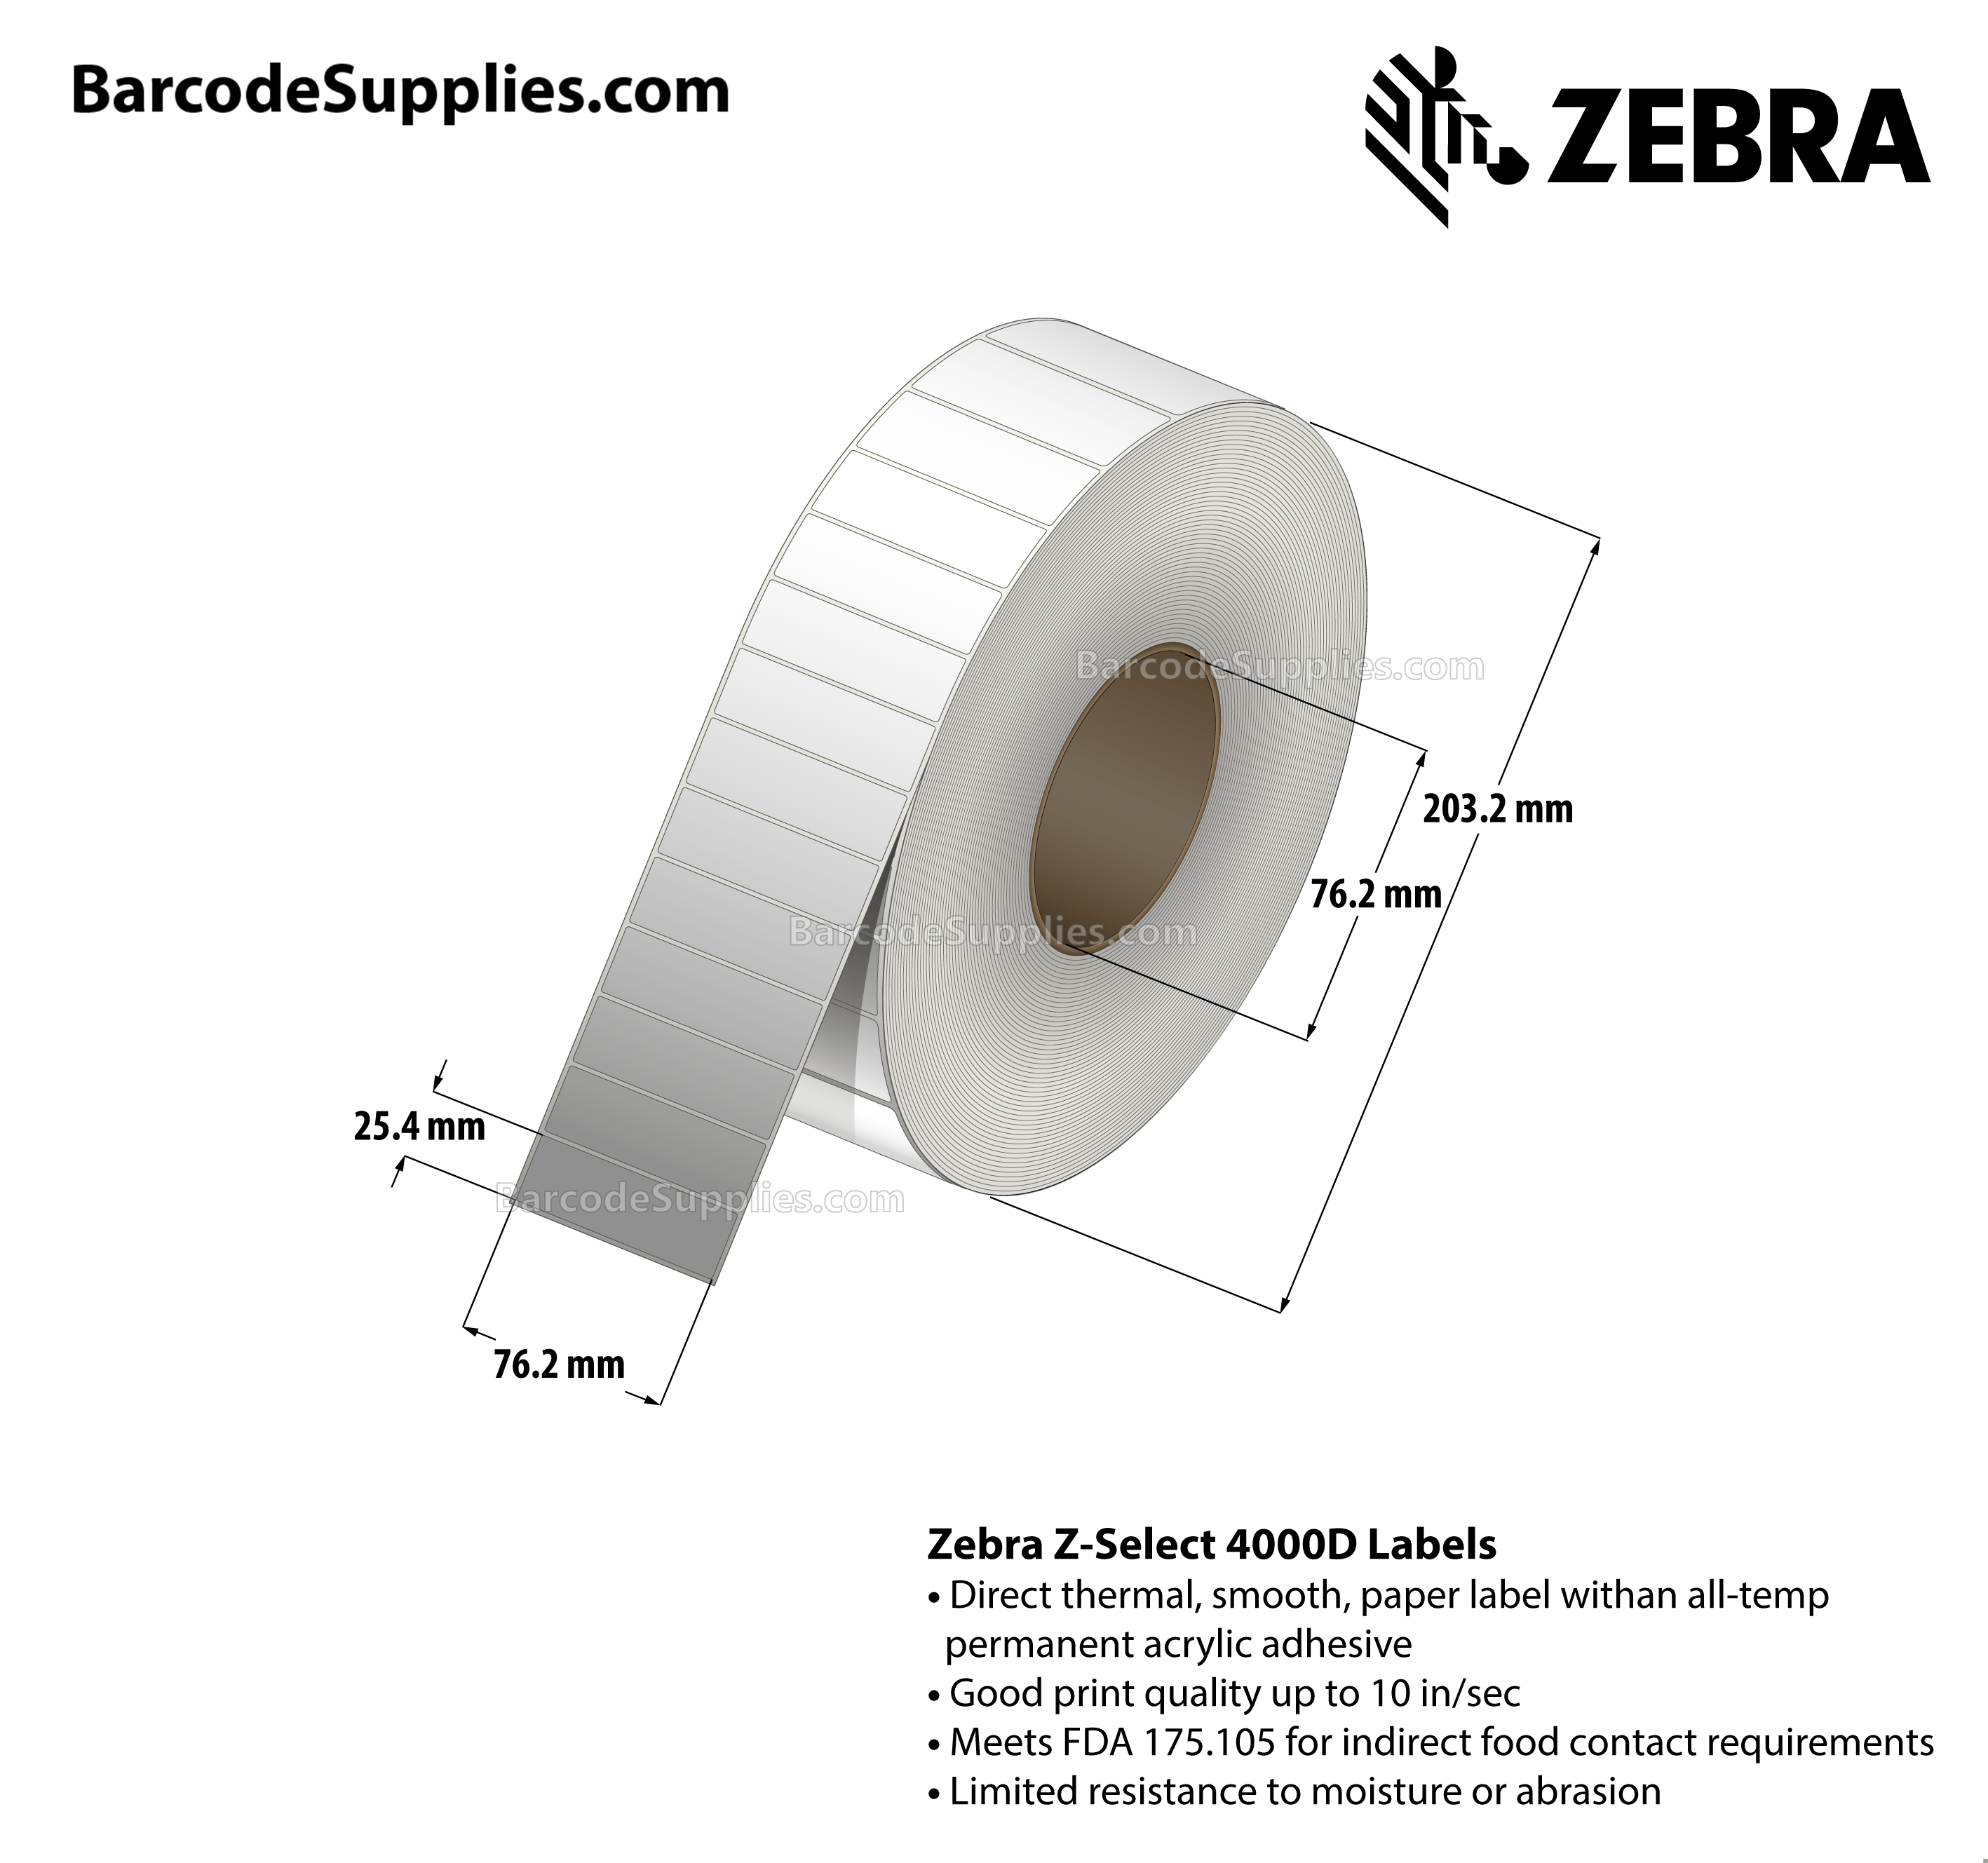 3 x 1 Direct Thermal White Z-Select 4000D Labels With All-Temp Adhesive - Not Perforated - 5120 Labels Per Roll - Carton Of 6 Rolls - 30720 Labels Total - MPN: 74569